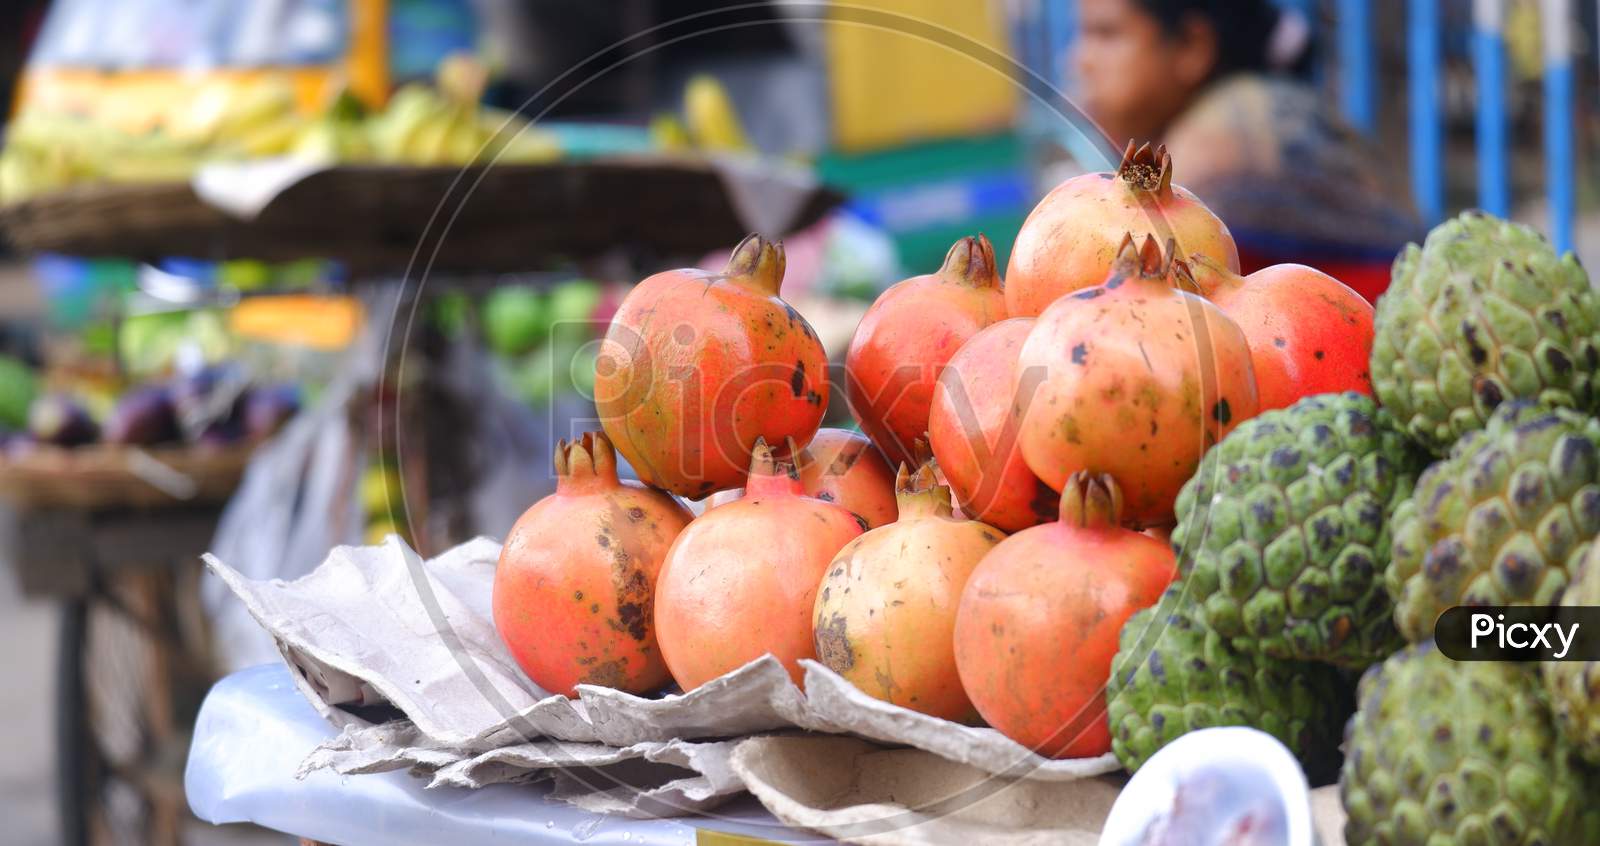 Close Image Of Fresh Pomegranate Being Sold On Road In India.